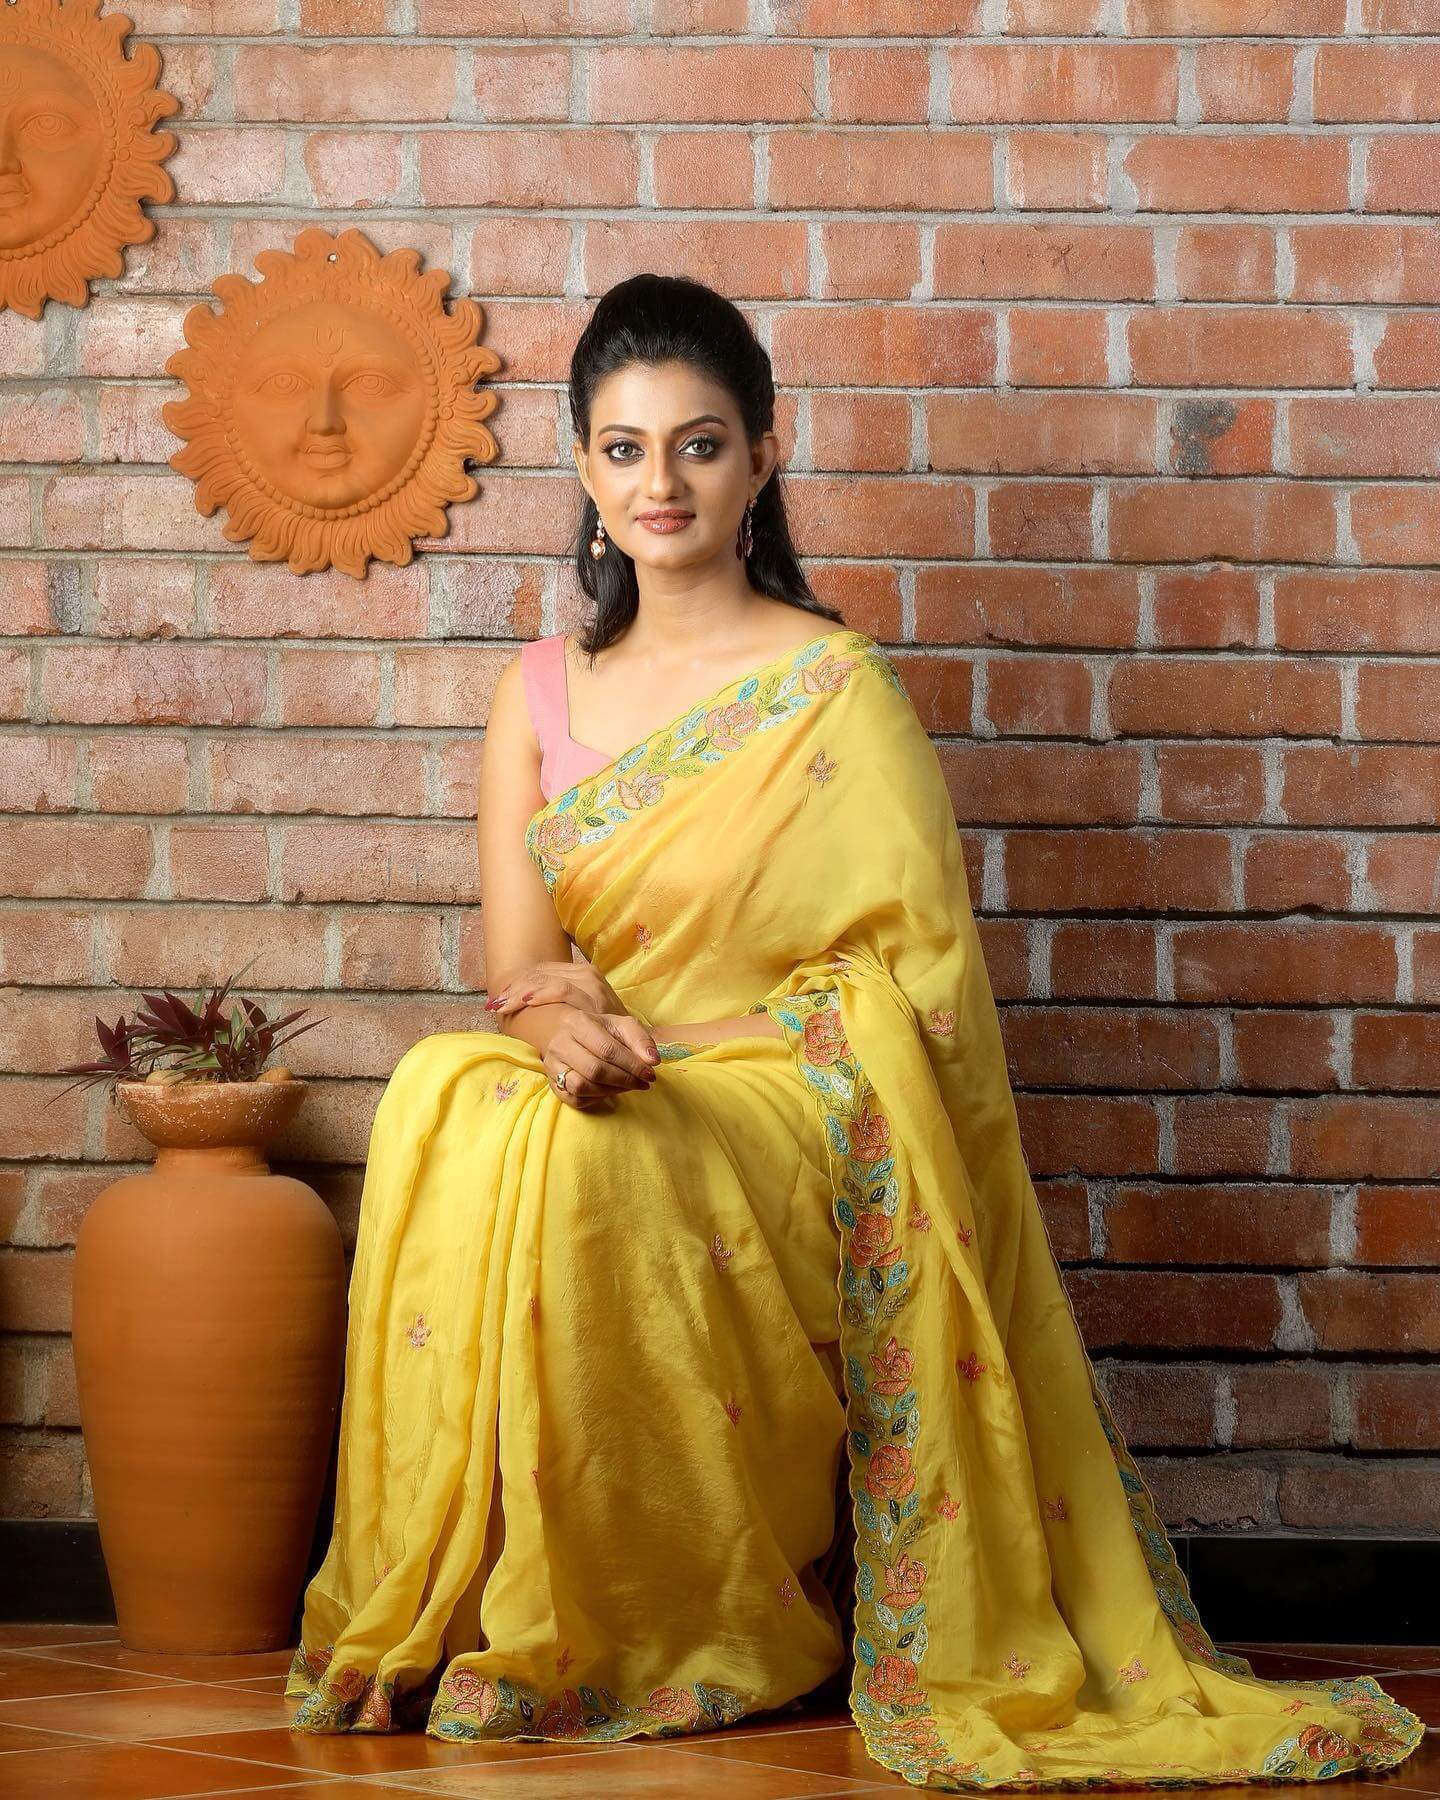 Priyanka Nair Look Pretty Amazing In a Yellow Floral Printed Saree With Contrasting Sleeveless Pink Blouse